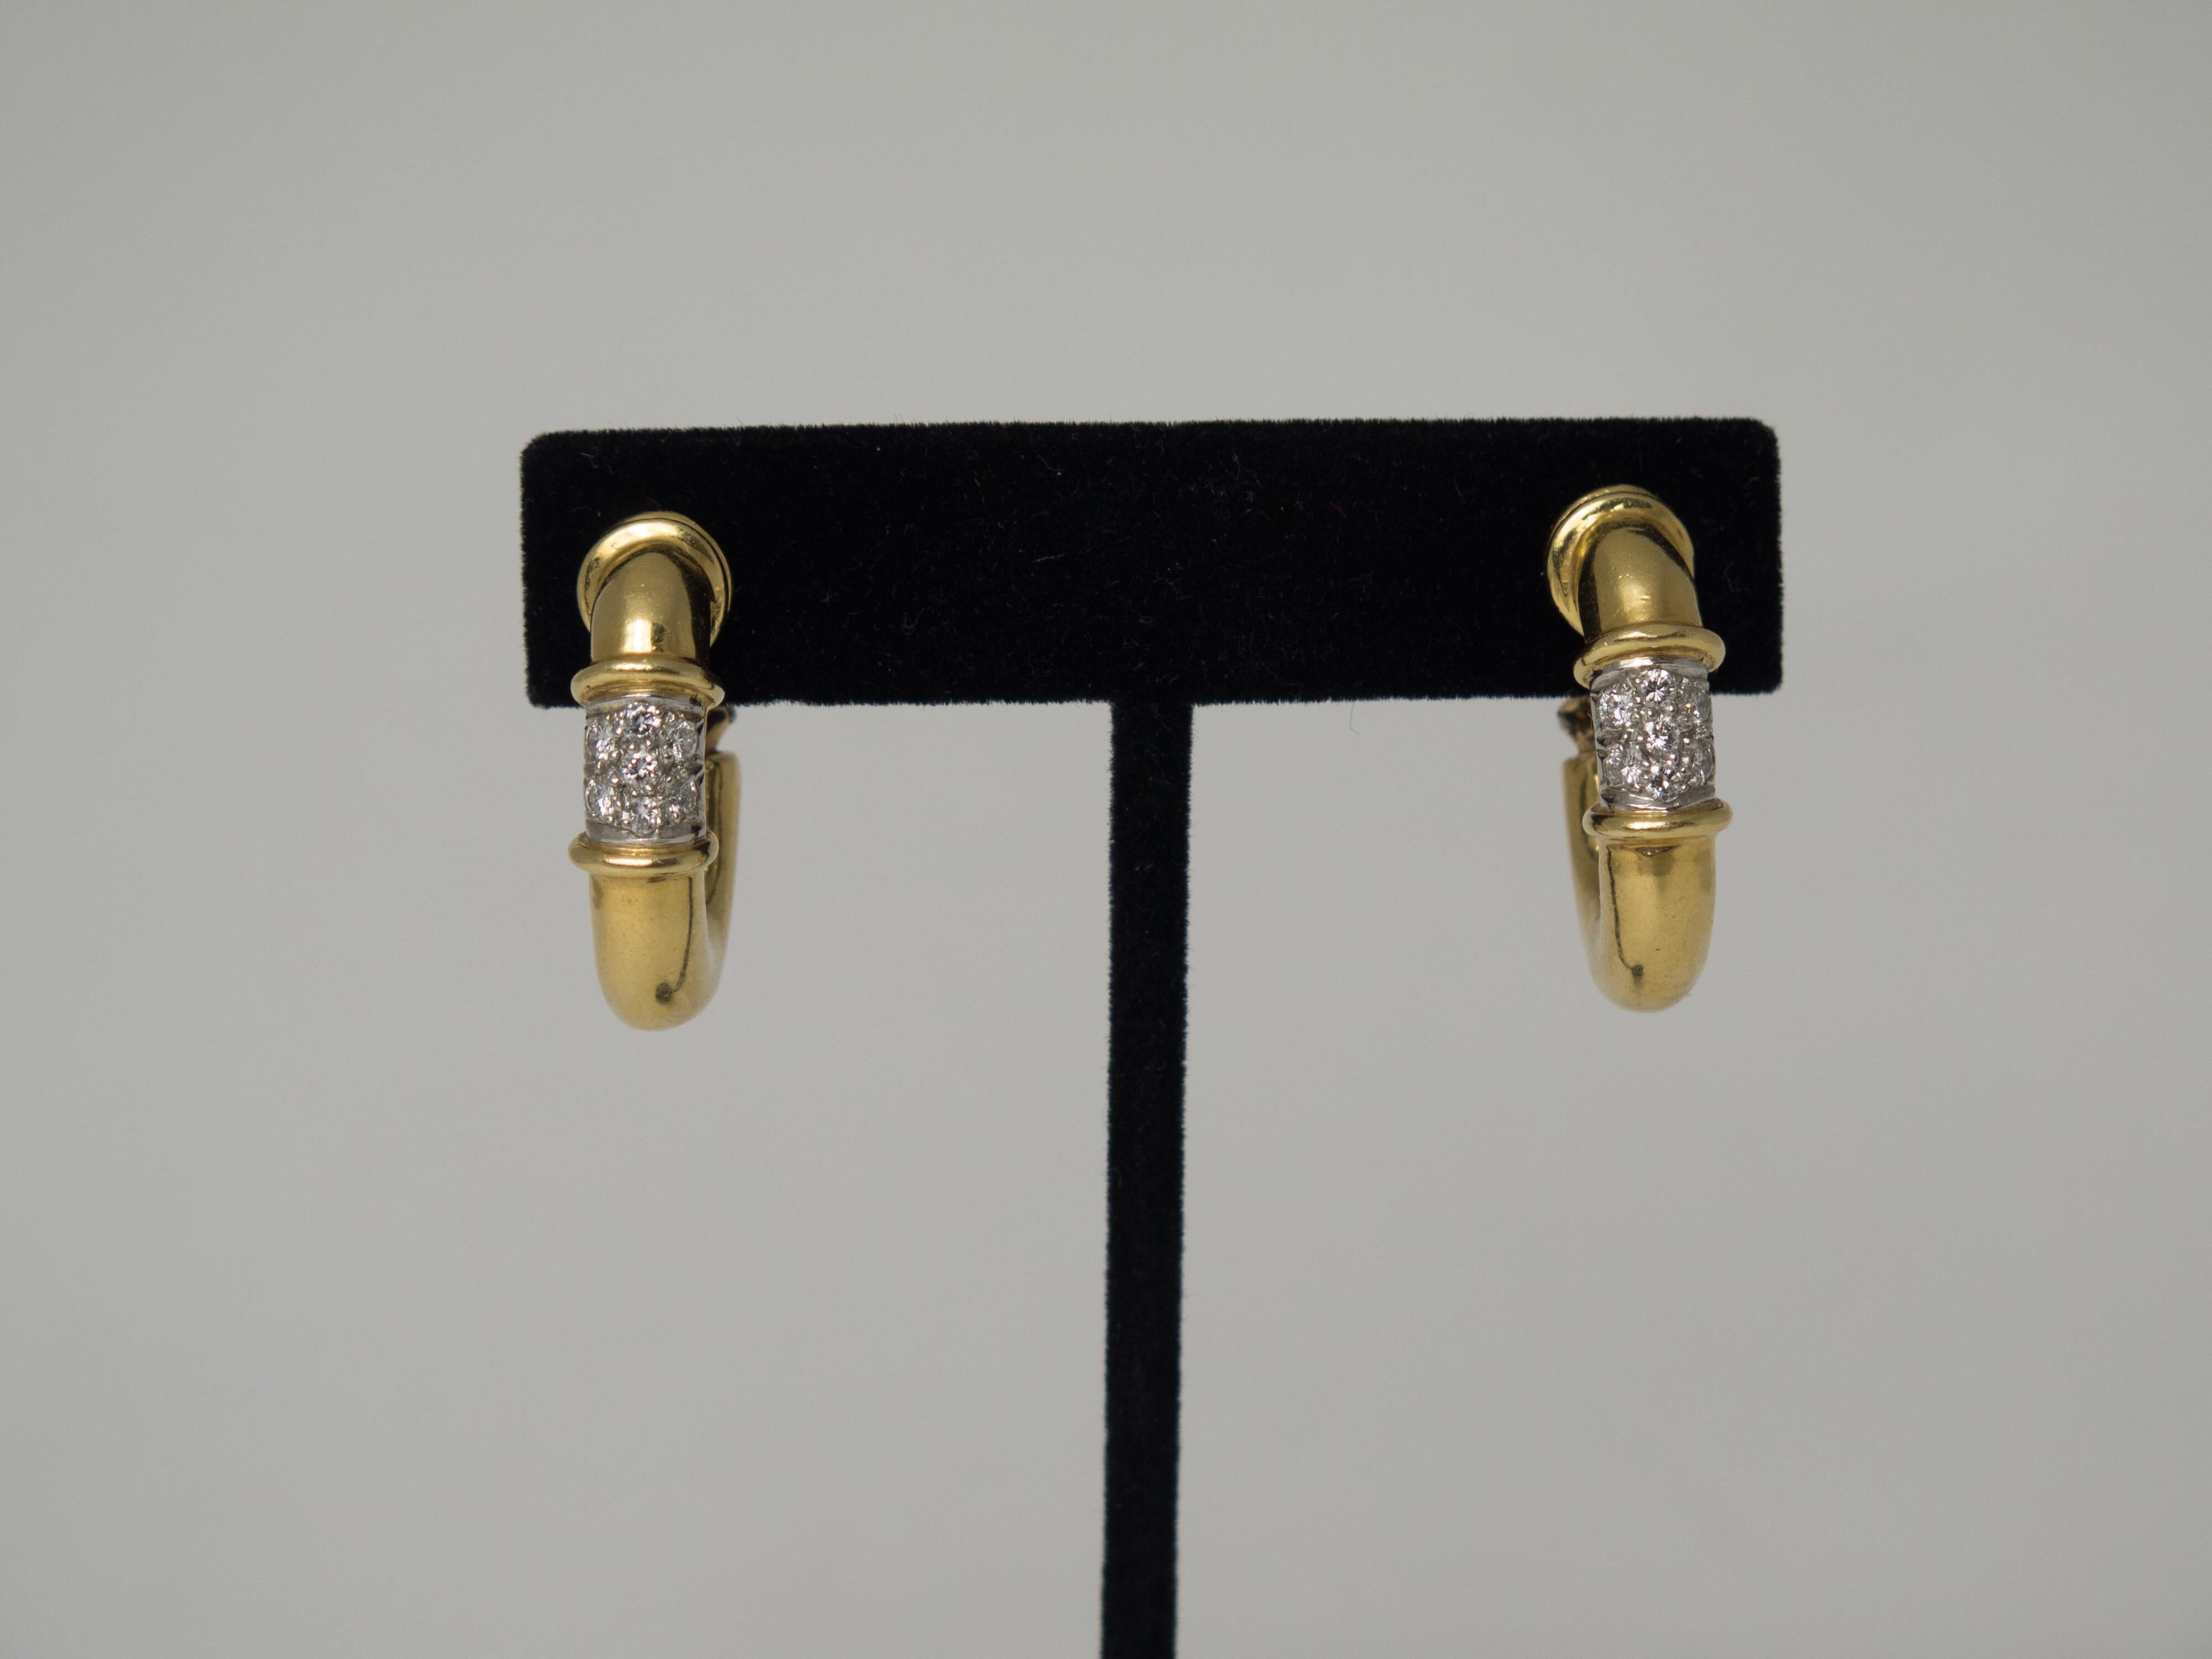 An elegant and versatile pair of convertible day and night door knocker style earrings. The large hanging hoops can be worn two ways, with the diamonds at the top, or at the bottom. Or, the hoops can be completely removed for a more understated look